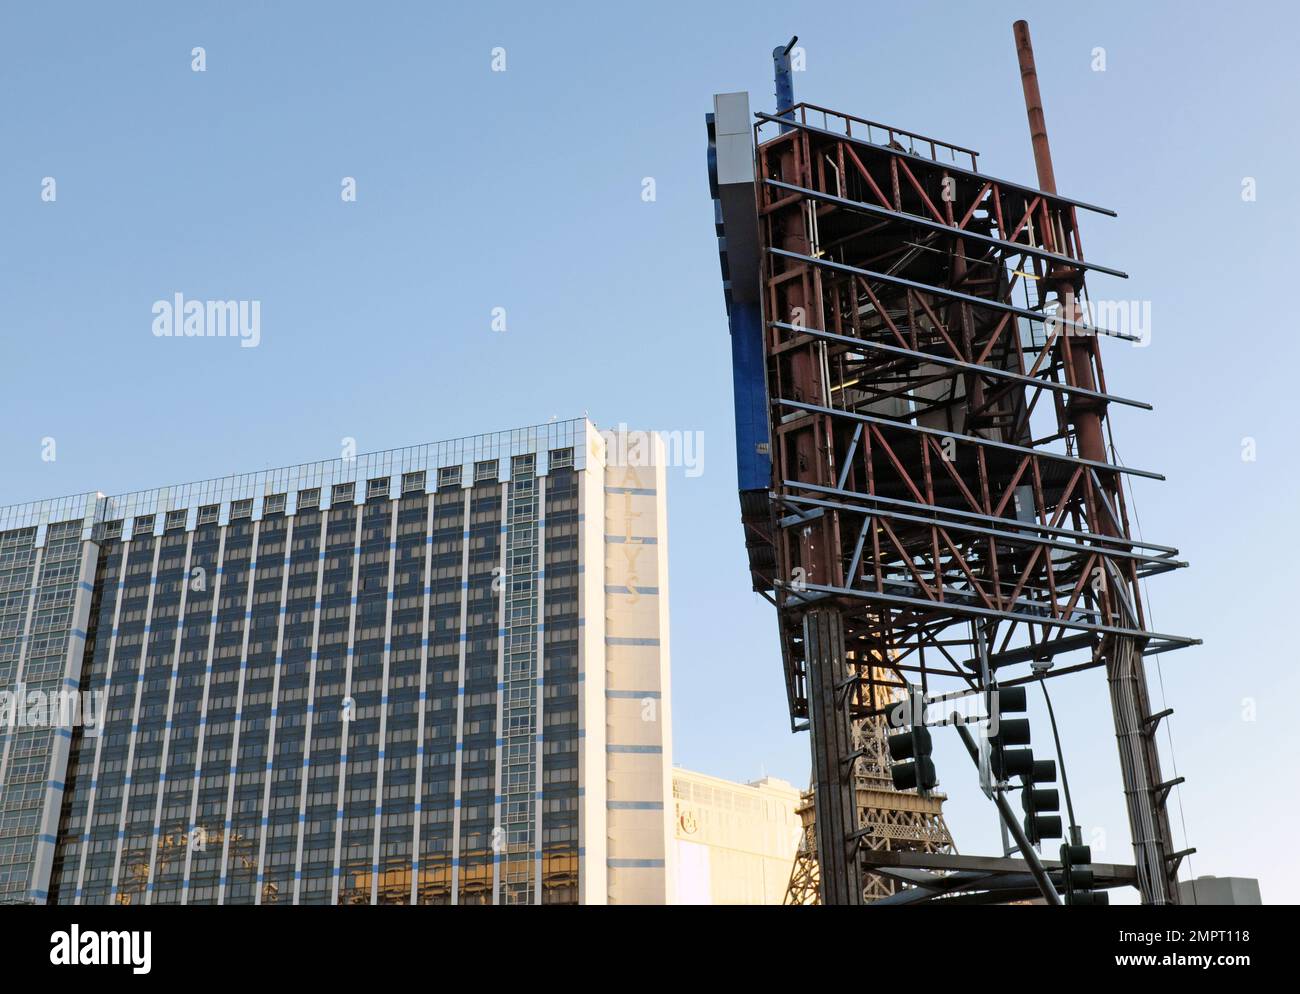 Rebranding of the iconic Bally's Las Vegas Hotel and Casino into the Horseshoe includes changing of signage.  Photo shows November 15, 2022 progress. Stock Photo